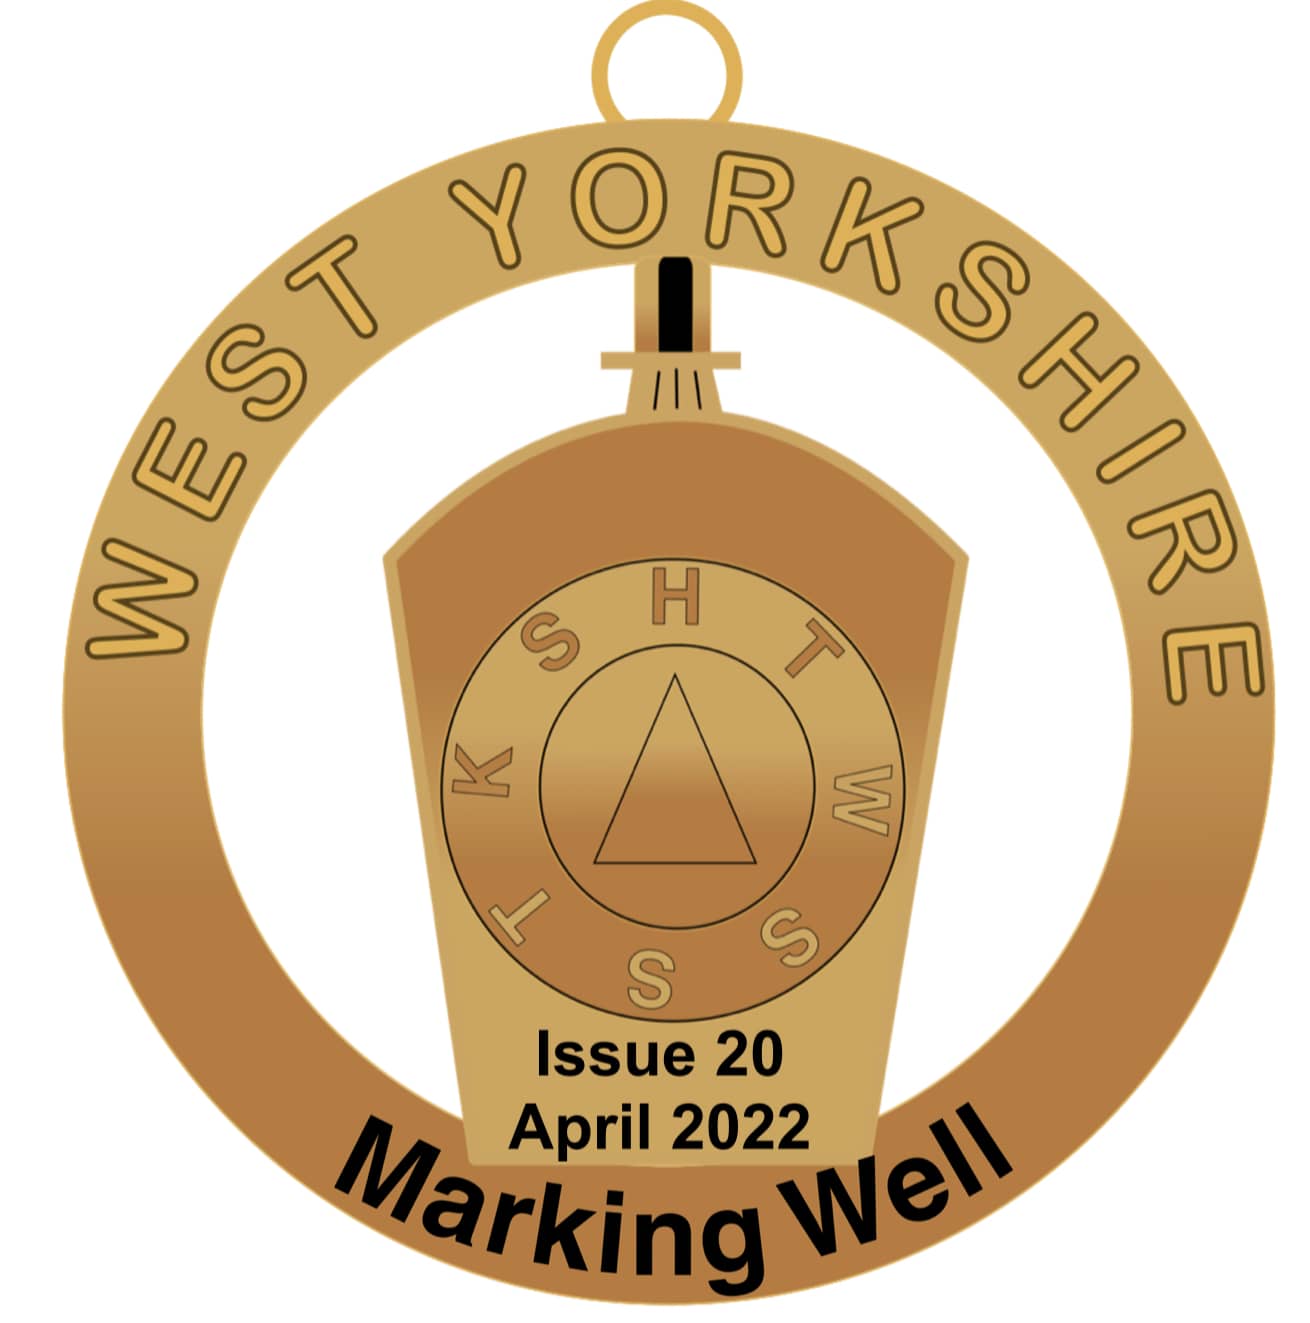 Marking Well Issue 20